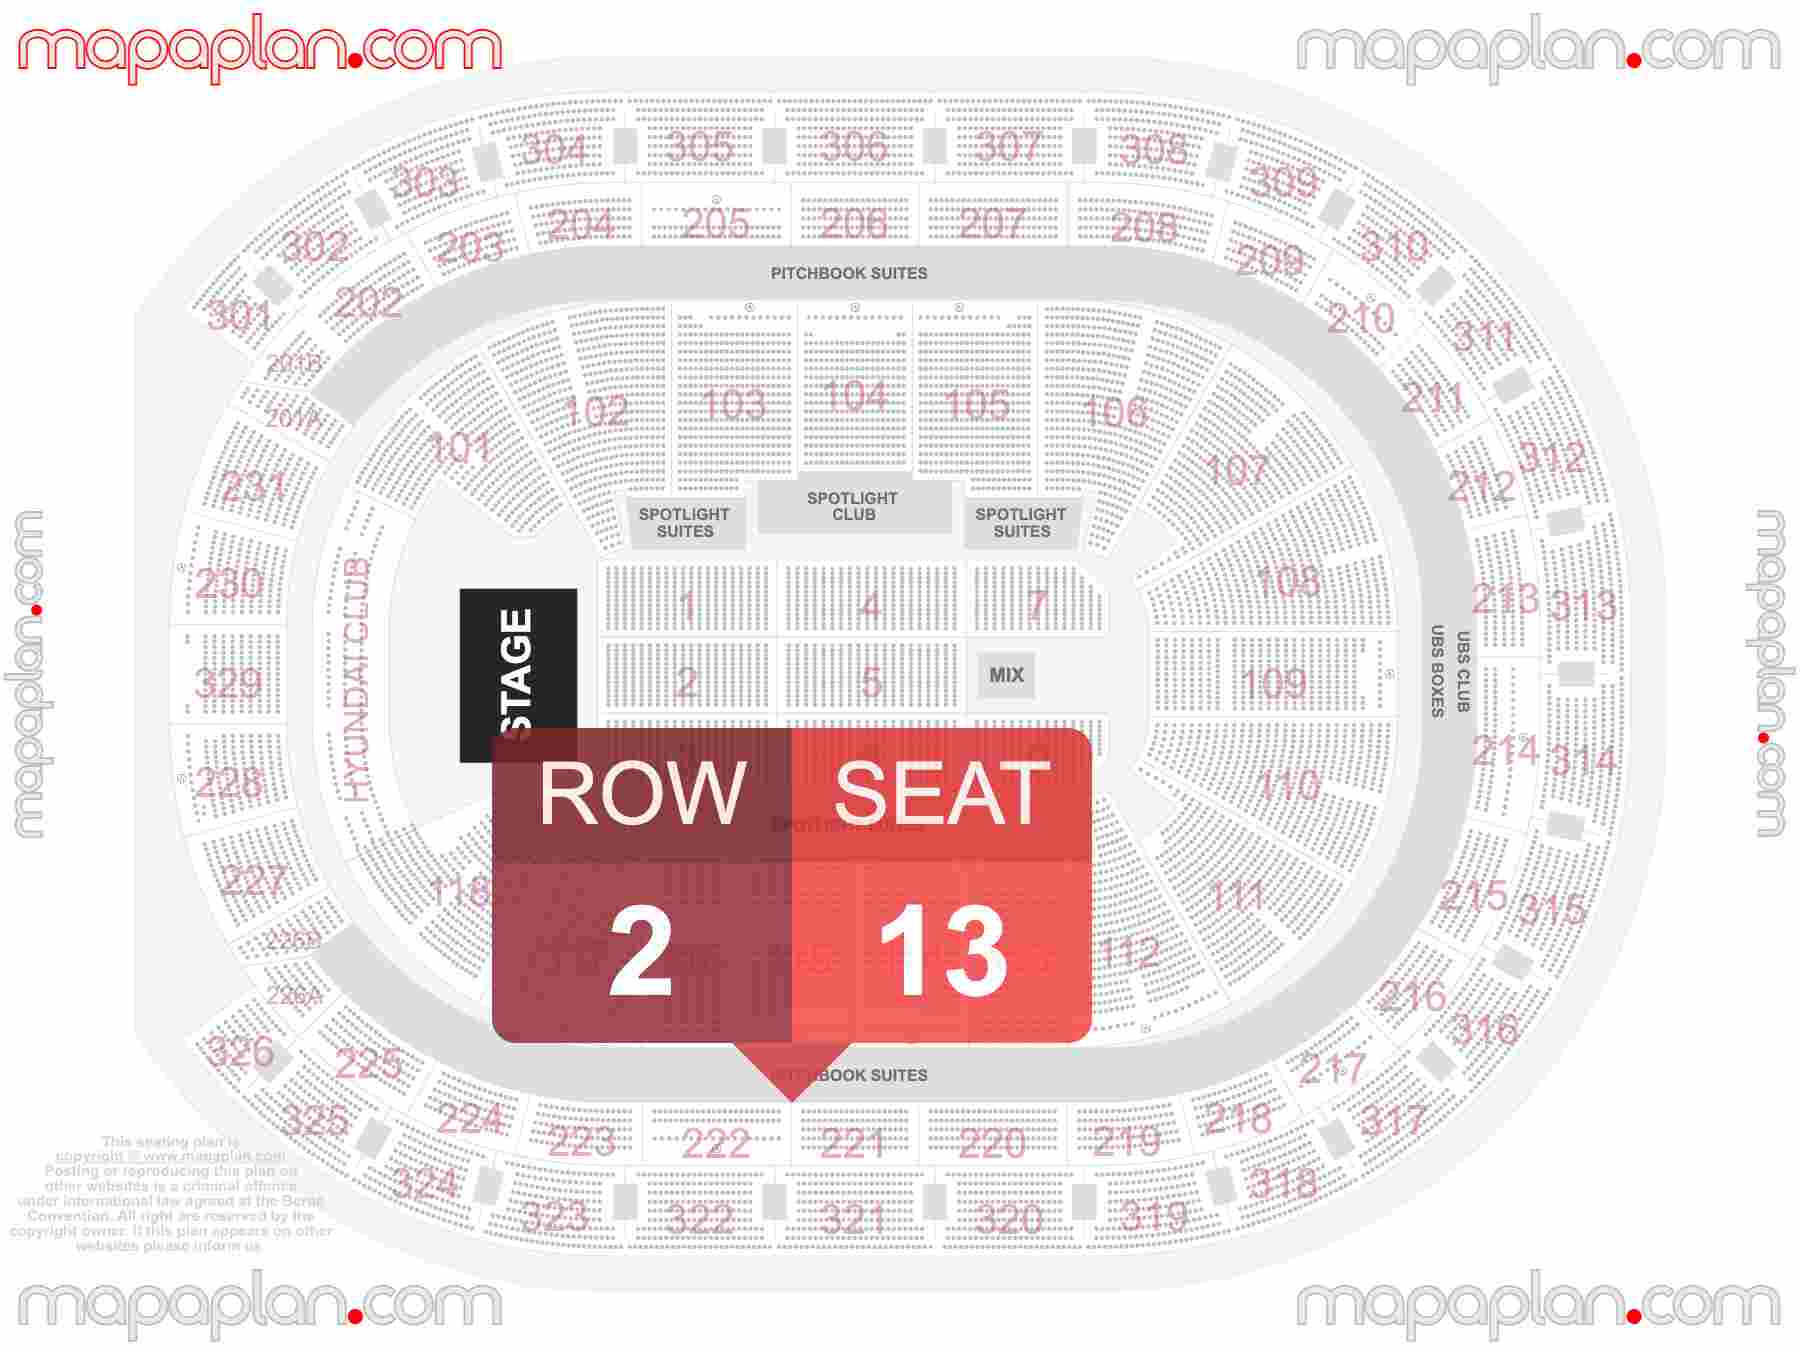 Belmont Park Elmont UBS Arena seating chart Concert detailed seat numbers and row numbering chart with interactive map plan layout